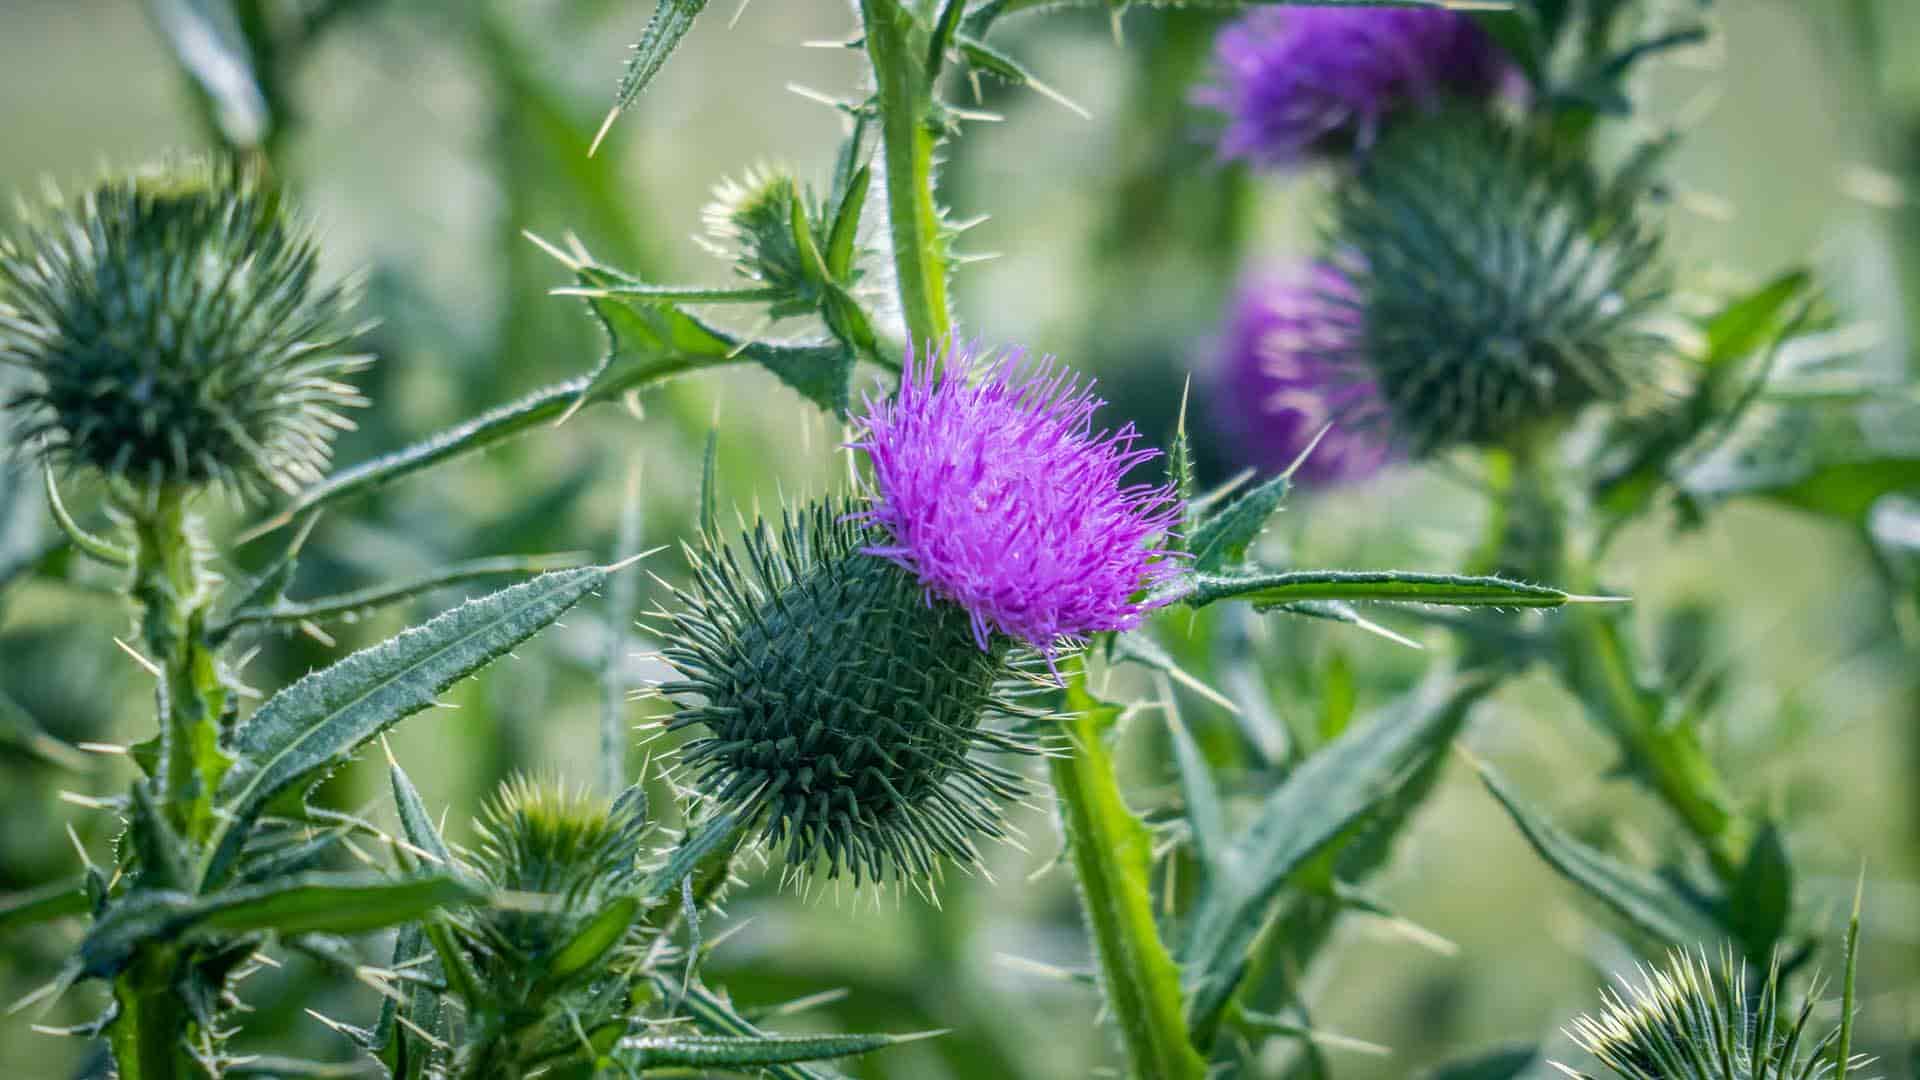 Thistles in a field